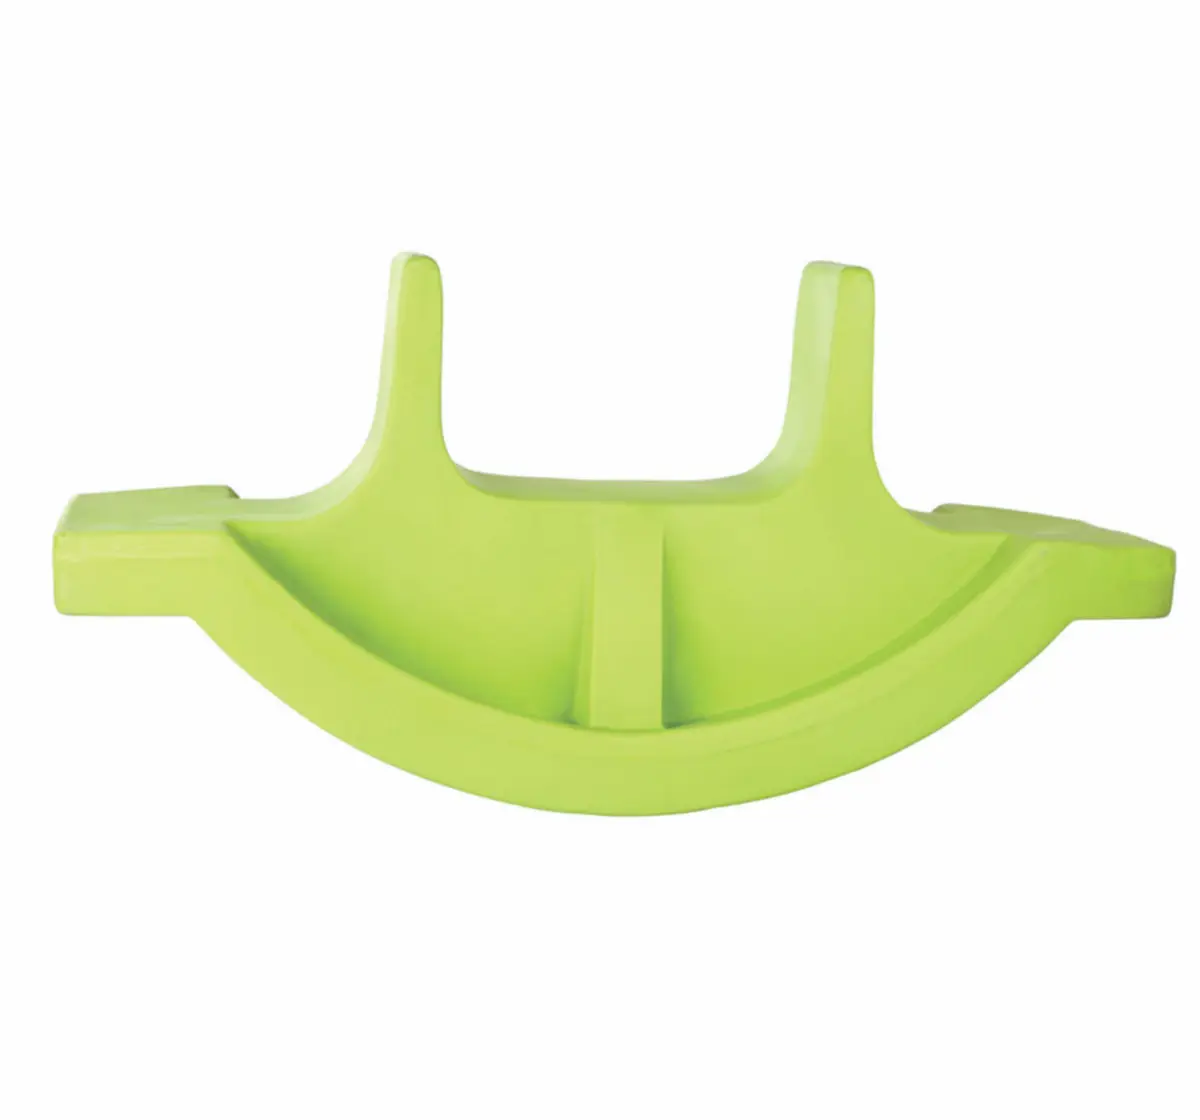 Ok Play Rocker Small for Kids Plastic Boat Ride On Toy Green 3Y+